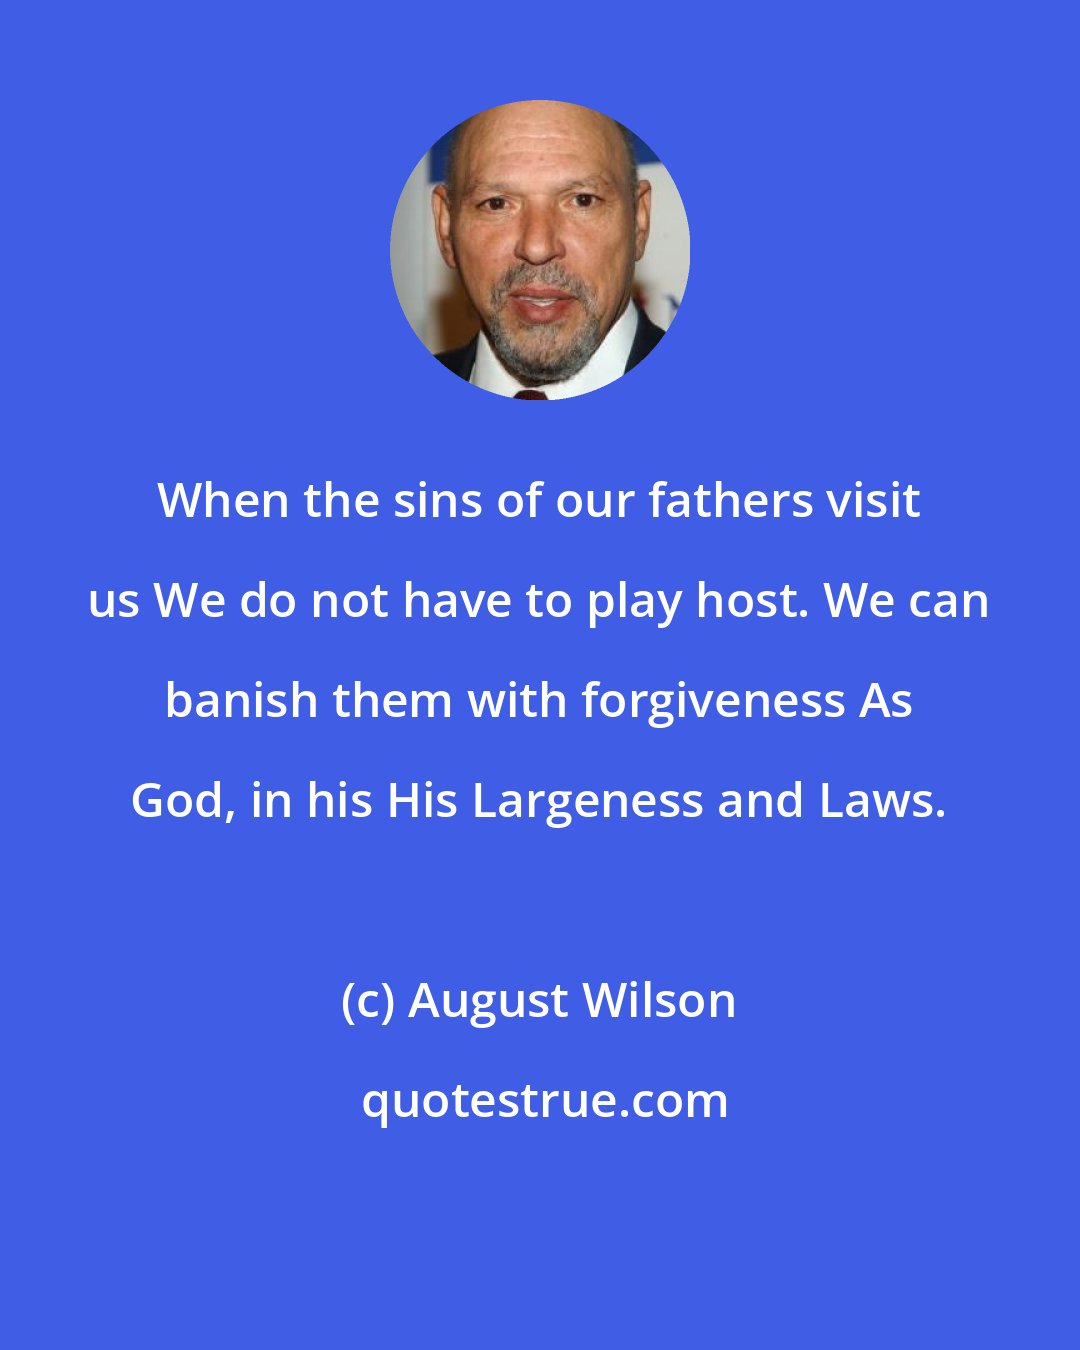 August Wilson: When the sins of our fathers visit us We do not have to play host. We can banish them with forgiveness As God, in his His Largeness and Laws.